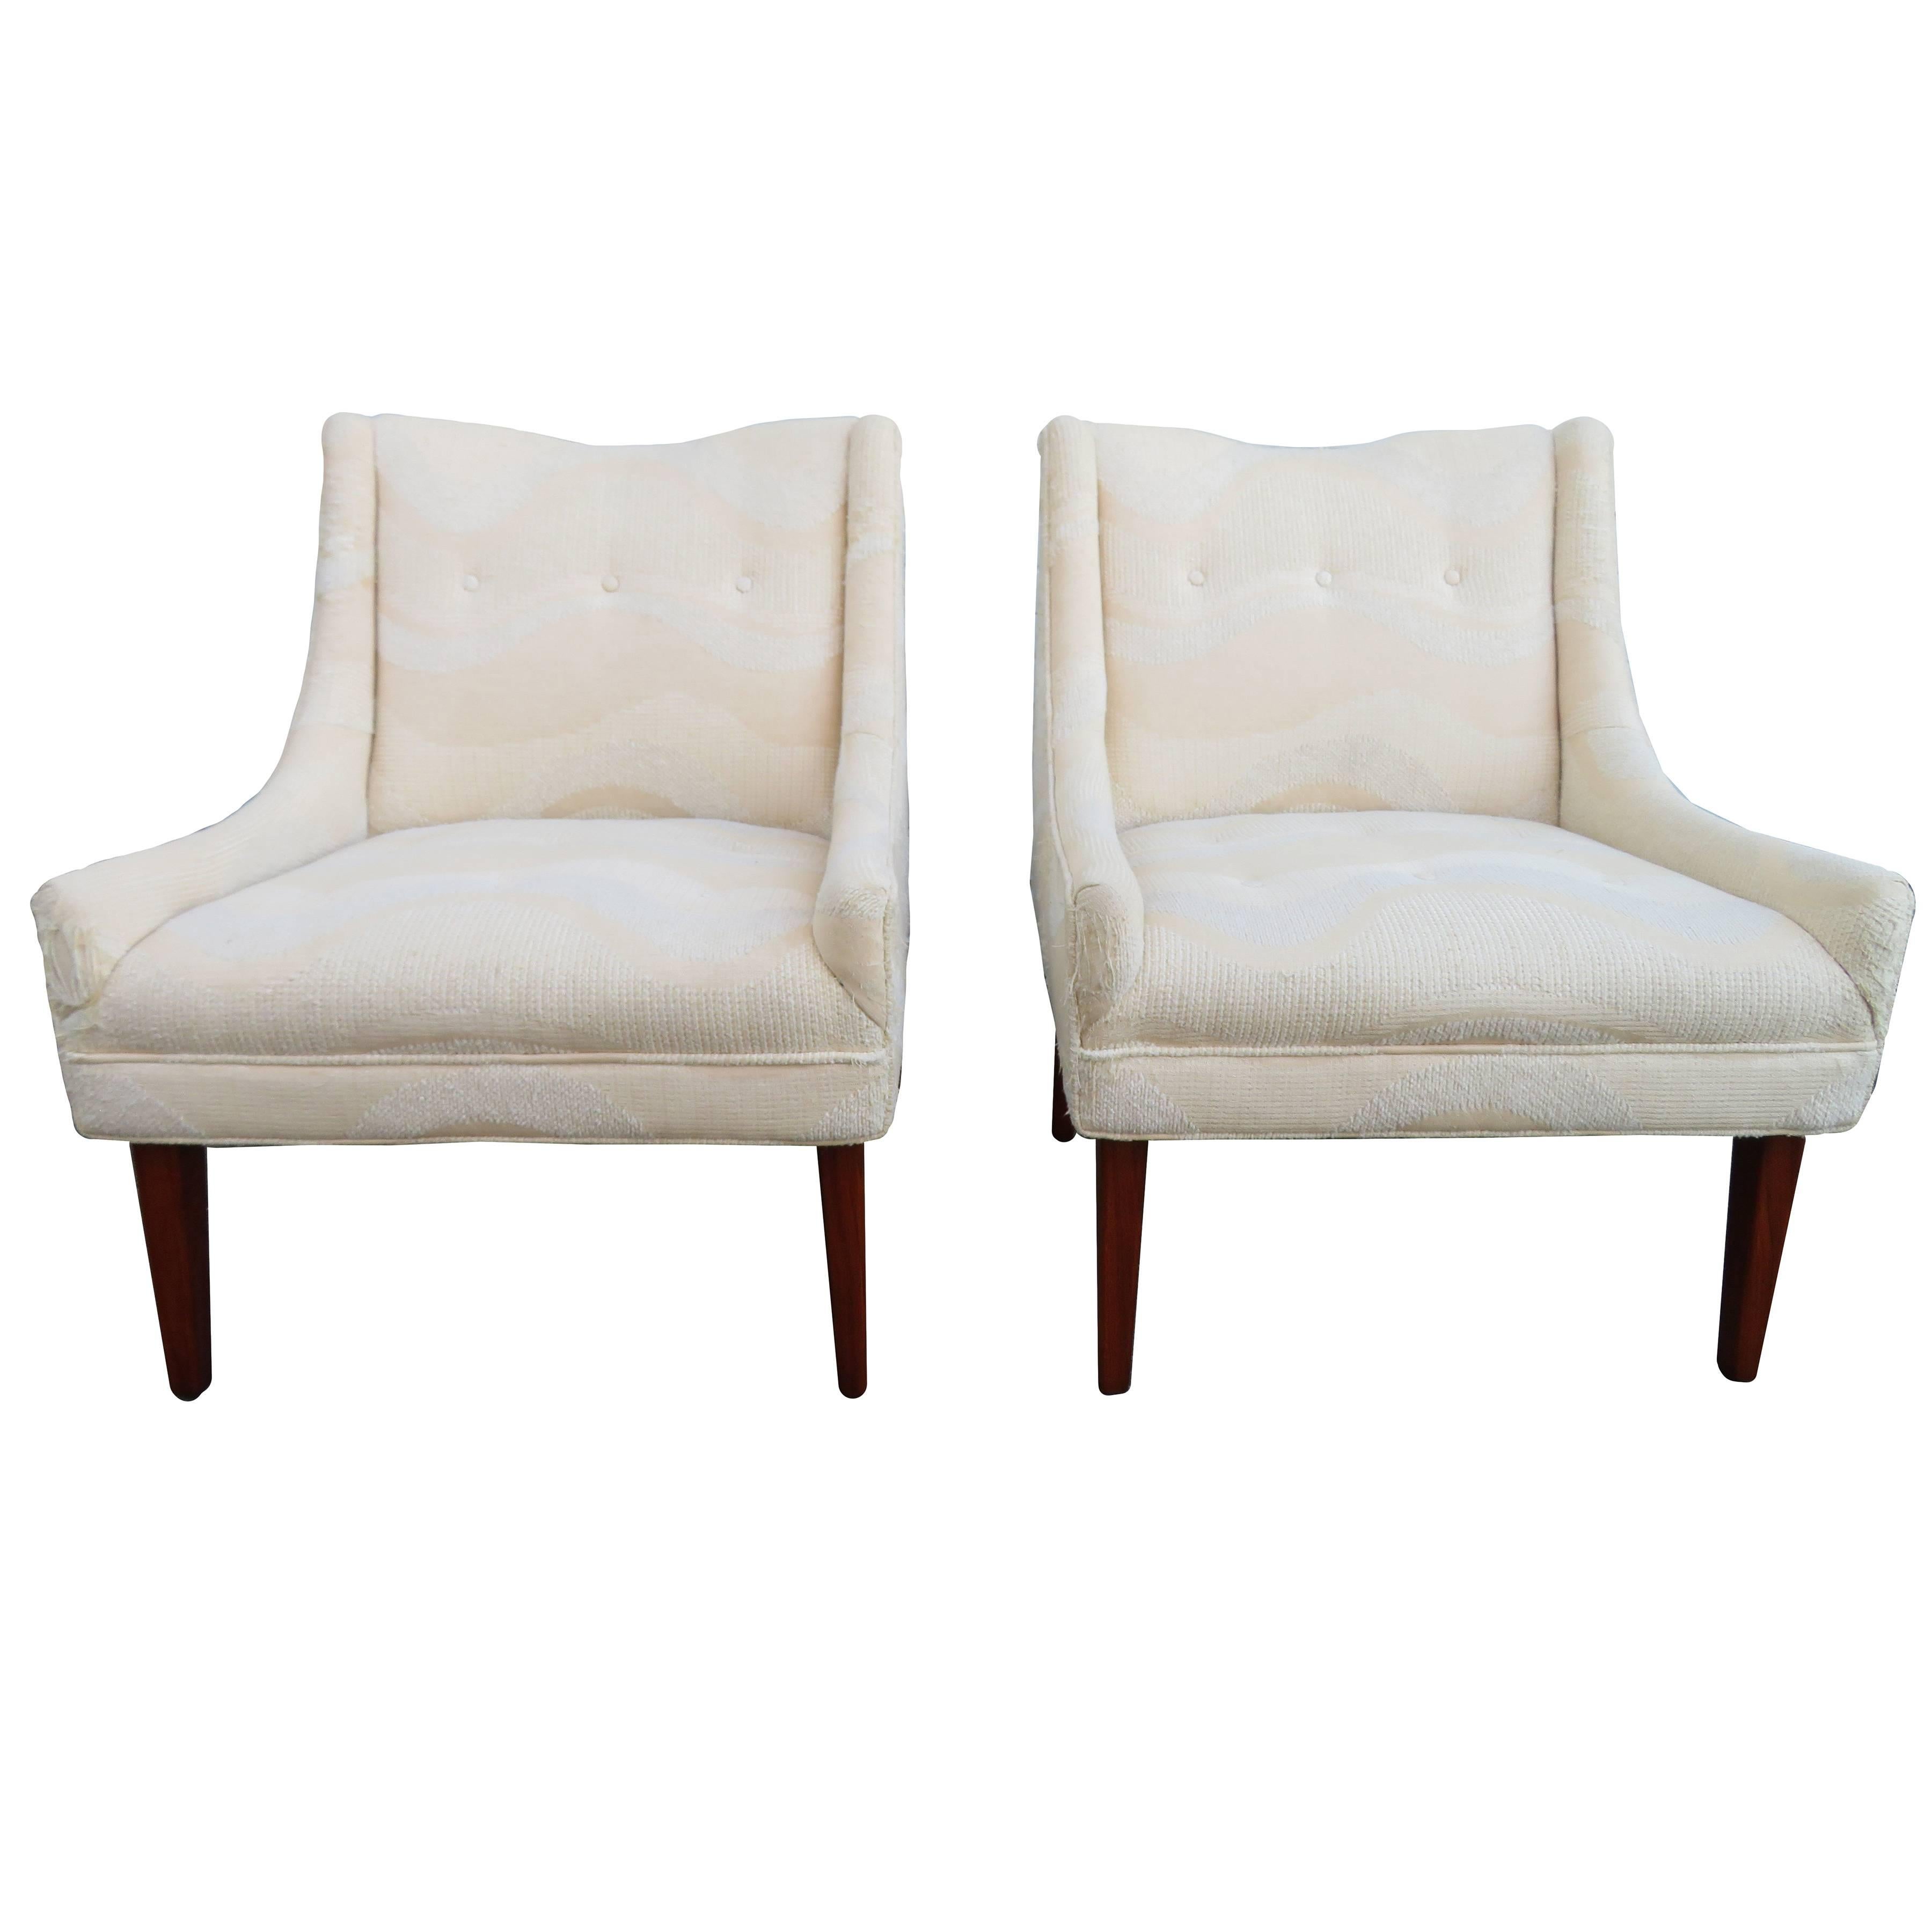 Pair of Slipper Lounge Chairs Mid-Century Modern For Sale